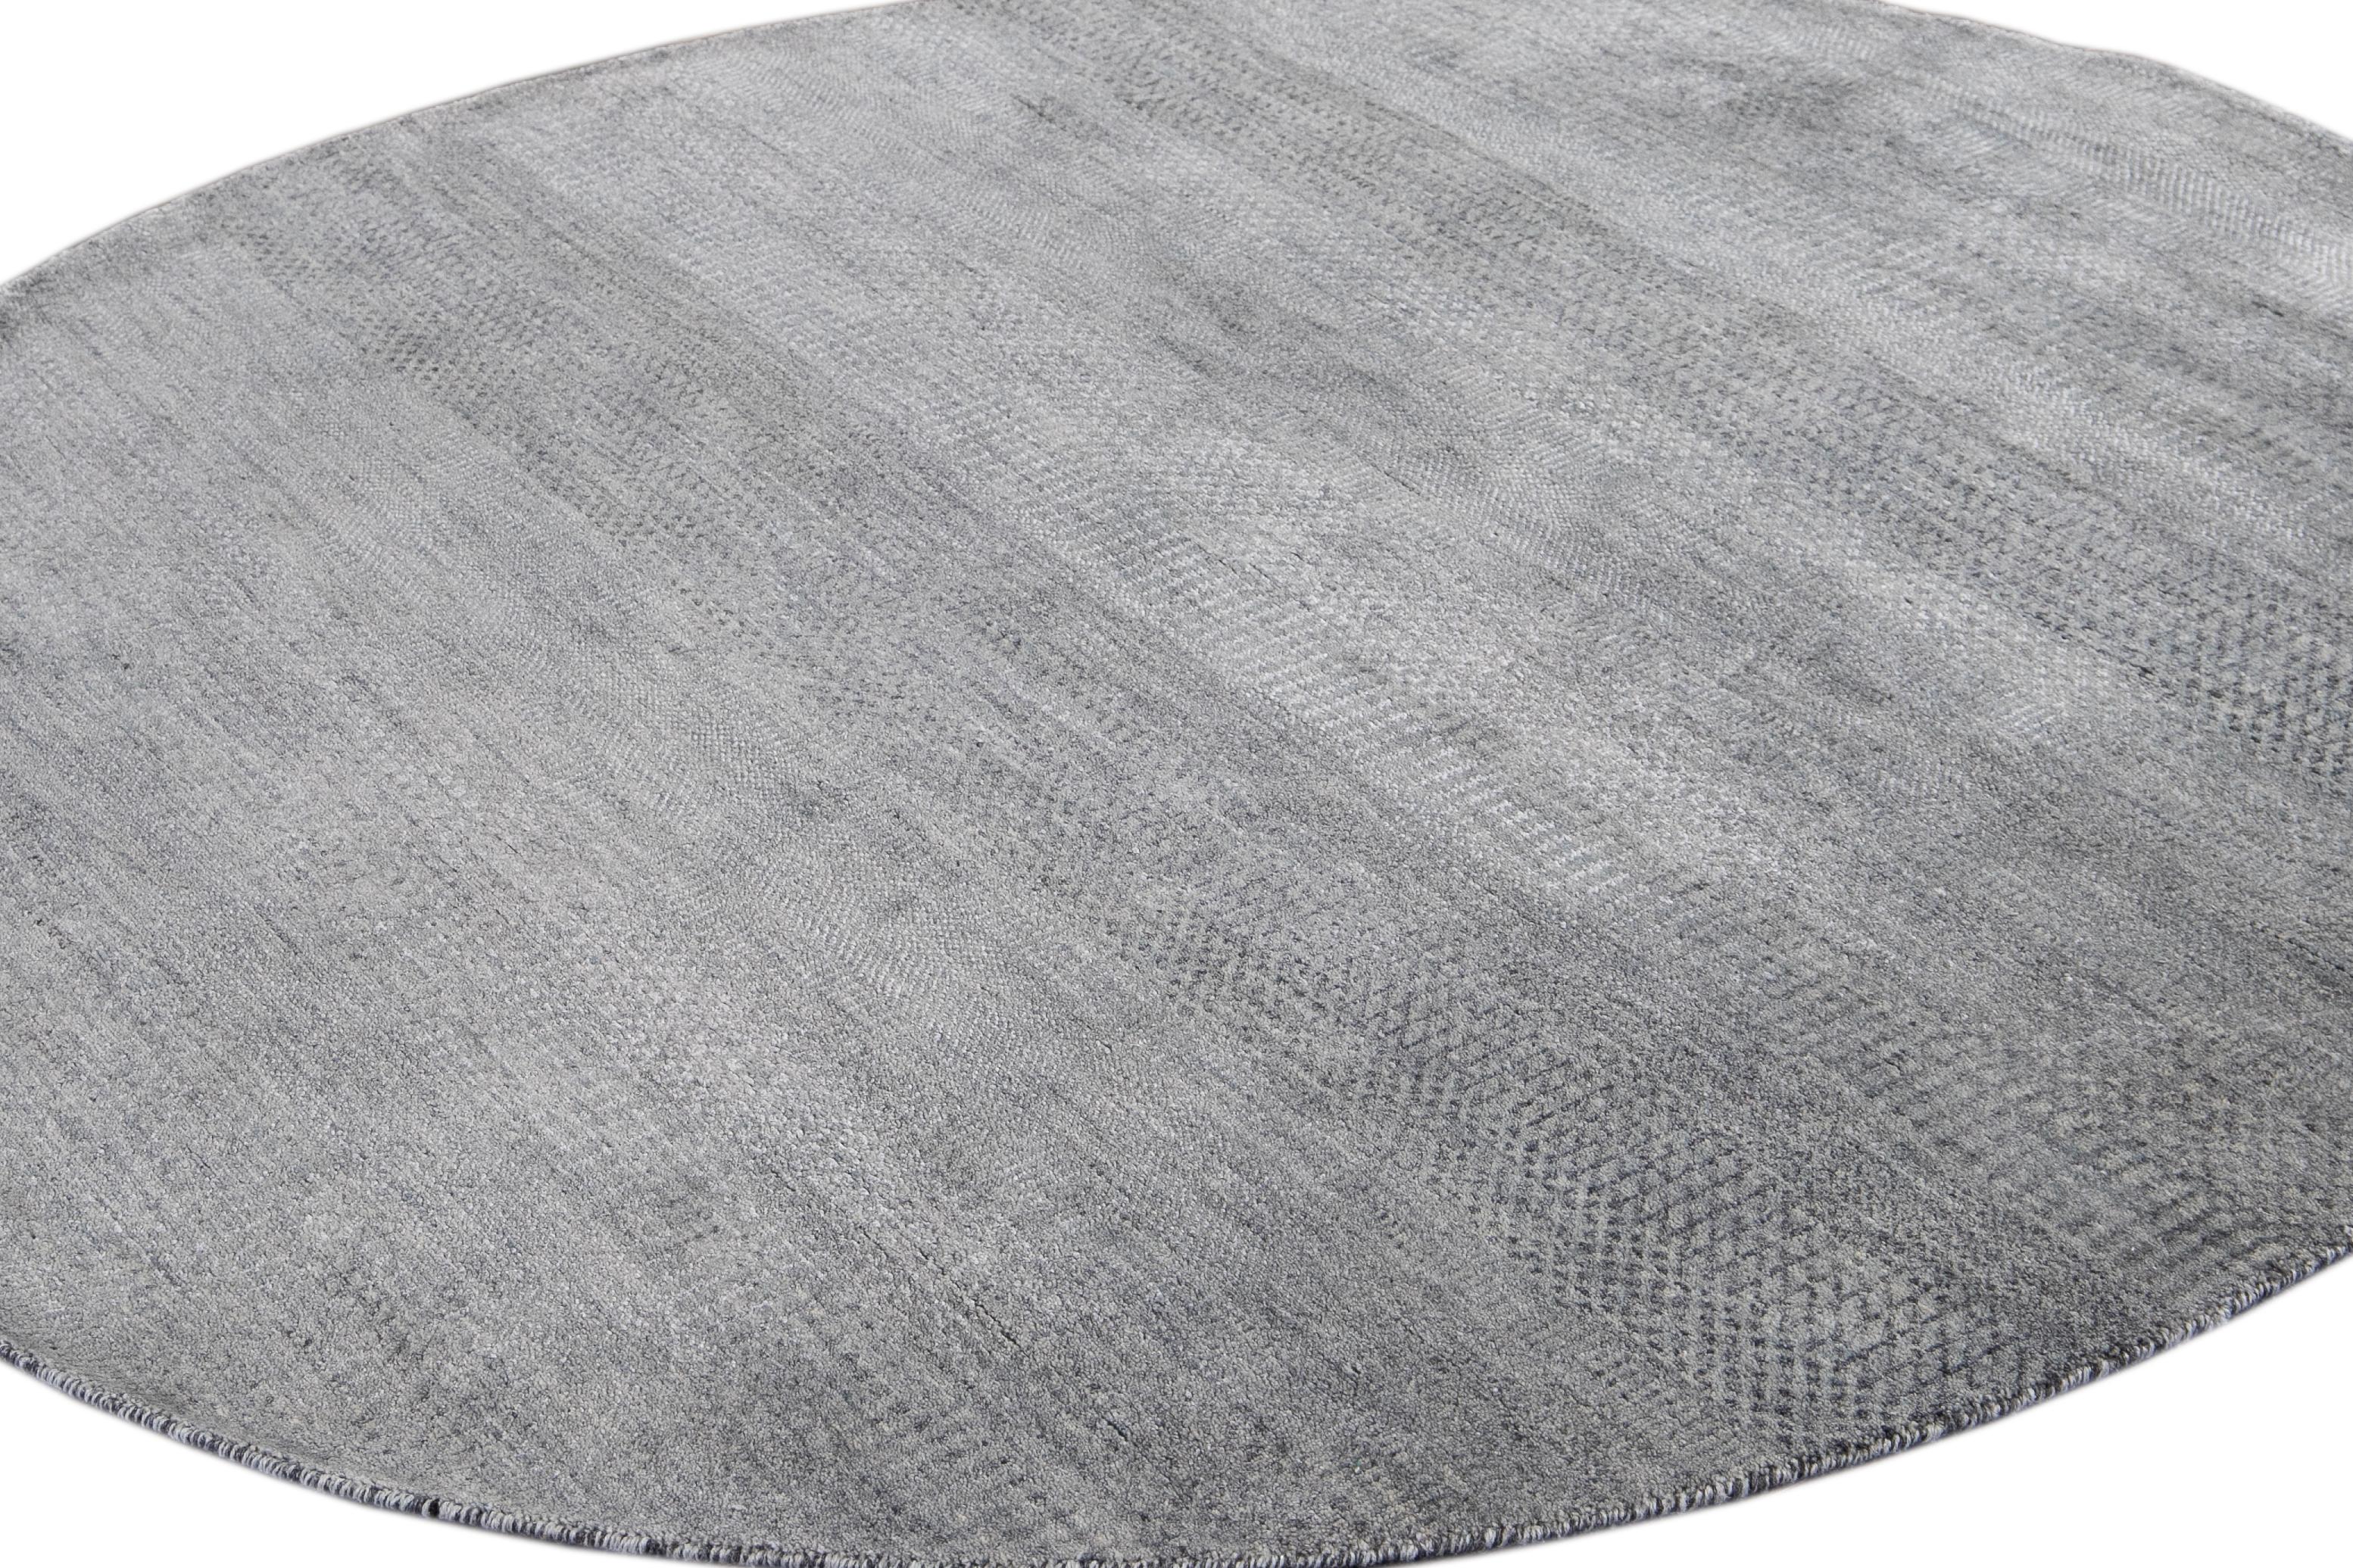 Beautiful contemporary Savannah round rug, hand knotted wool with a gray field, silver accents in an all-over striped design, circa 2019.
This rug has a diameter of 6' 0